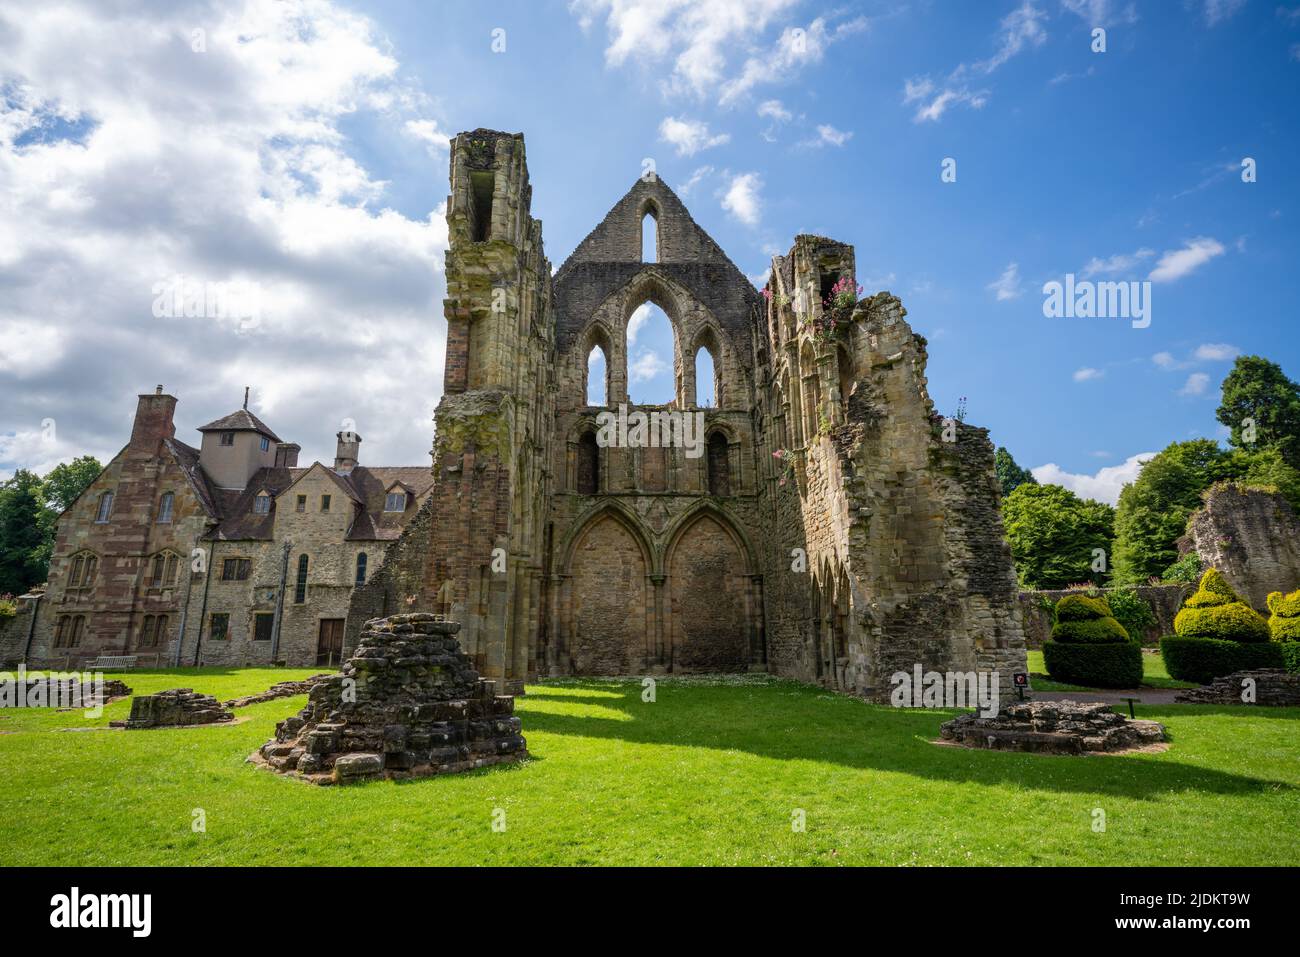 The 12th Century Wenlock Priory in Shropshire, England Stock Photo